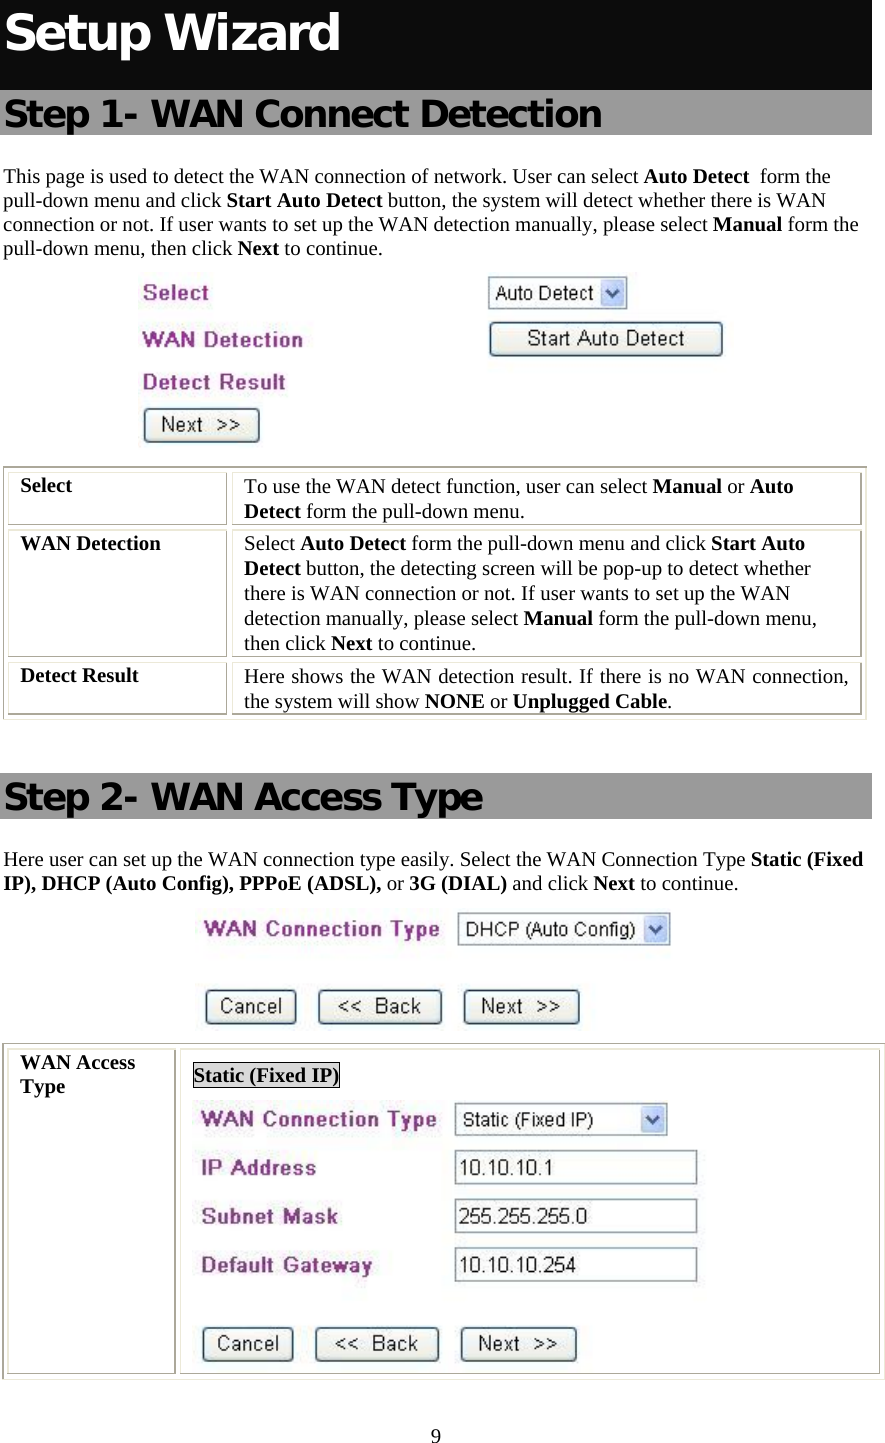   9 Setup Wizard Step 1- WAN Connect Detection This page is used to detect the WAN connection of network. User can select Auto Detect  form the pull-down menu and click Start Auto Detect button, the system will detect whether there is WAN connection or not. If user wants to set up the WAN detection manually, please select Manual form the pull-down menu, then click Next to continue.  Select  To use the WAN detect function, user can select Manual or Auto  Detect form the pull-down menu.  WAN Detection  Select Auto Detect form the pull-down menu and click Start Auto Detect button, the detecting screen will be pop-up to detect whether there is WAN connection or not. If user wants to set up the WAN detection manually, please select Manual form the pull-down menu, then click Next to continue. Detect Result  Here shows the WAN detection result. If there is no WAN connection, the system will show NONE or Unplugged Cable.  Step 2- WAN Access Type Here user can set up the WAN connection type easily. Select the WAN Connection Type Static (Fixed IP), DHCP (Auto Config), PPPoE (ADSL), or 3G (DIAL) and click Next to continue.  WAN Access Type  Static (Fixed IP)  